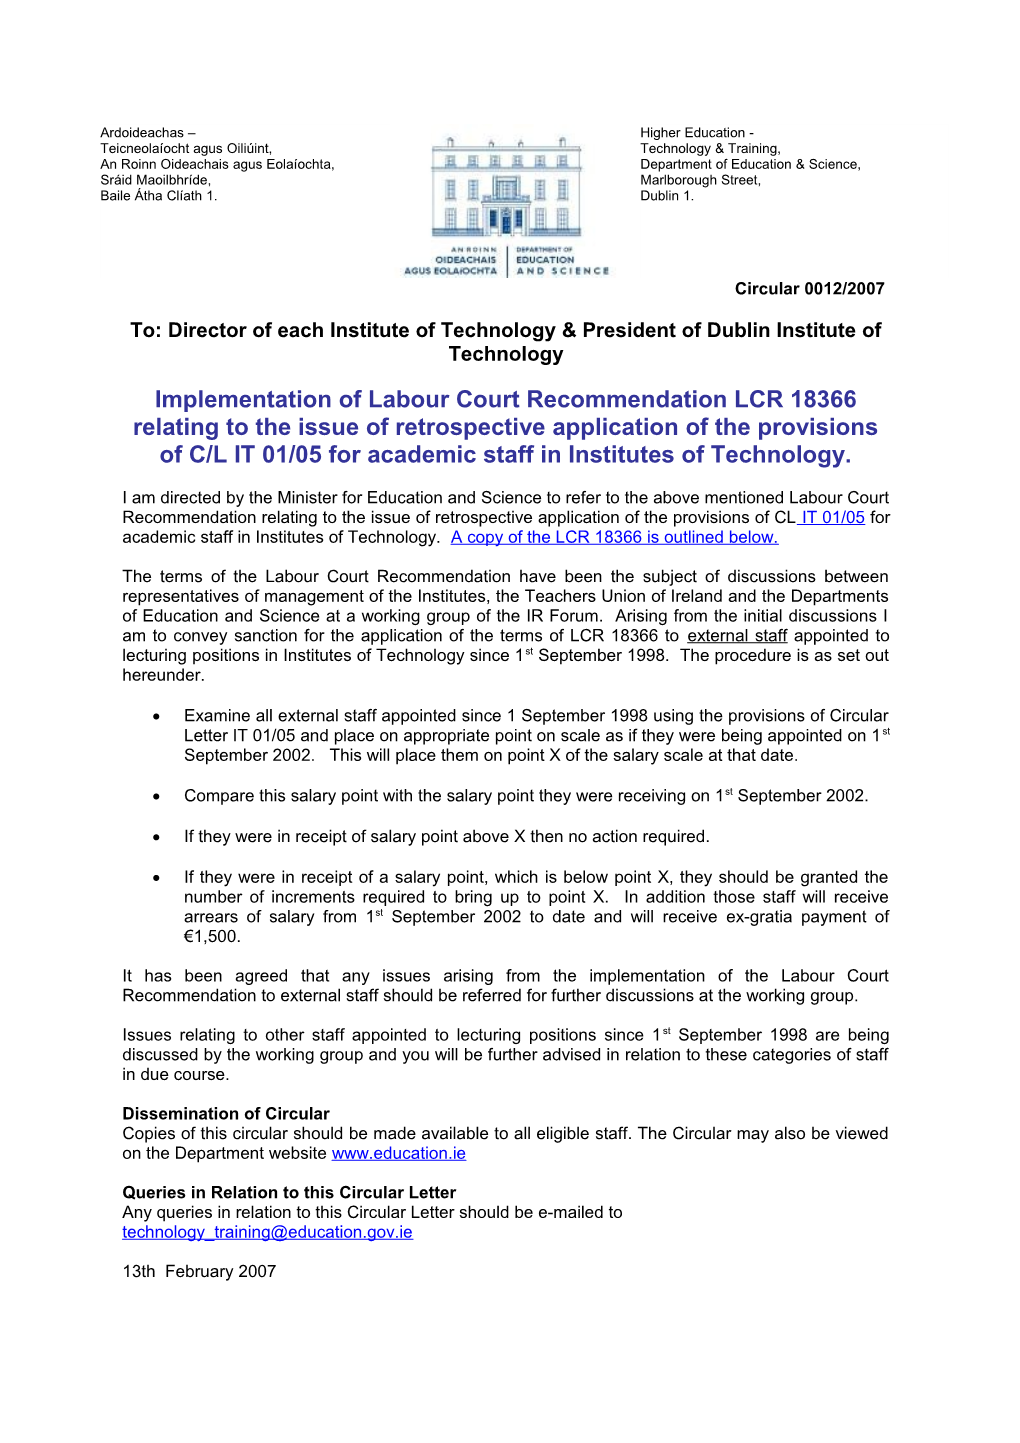 Circular 0012/2007 - Implementation of Labour Court Recommendation LCR 18366 Relating To